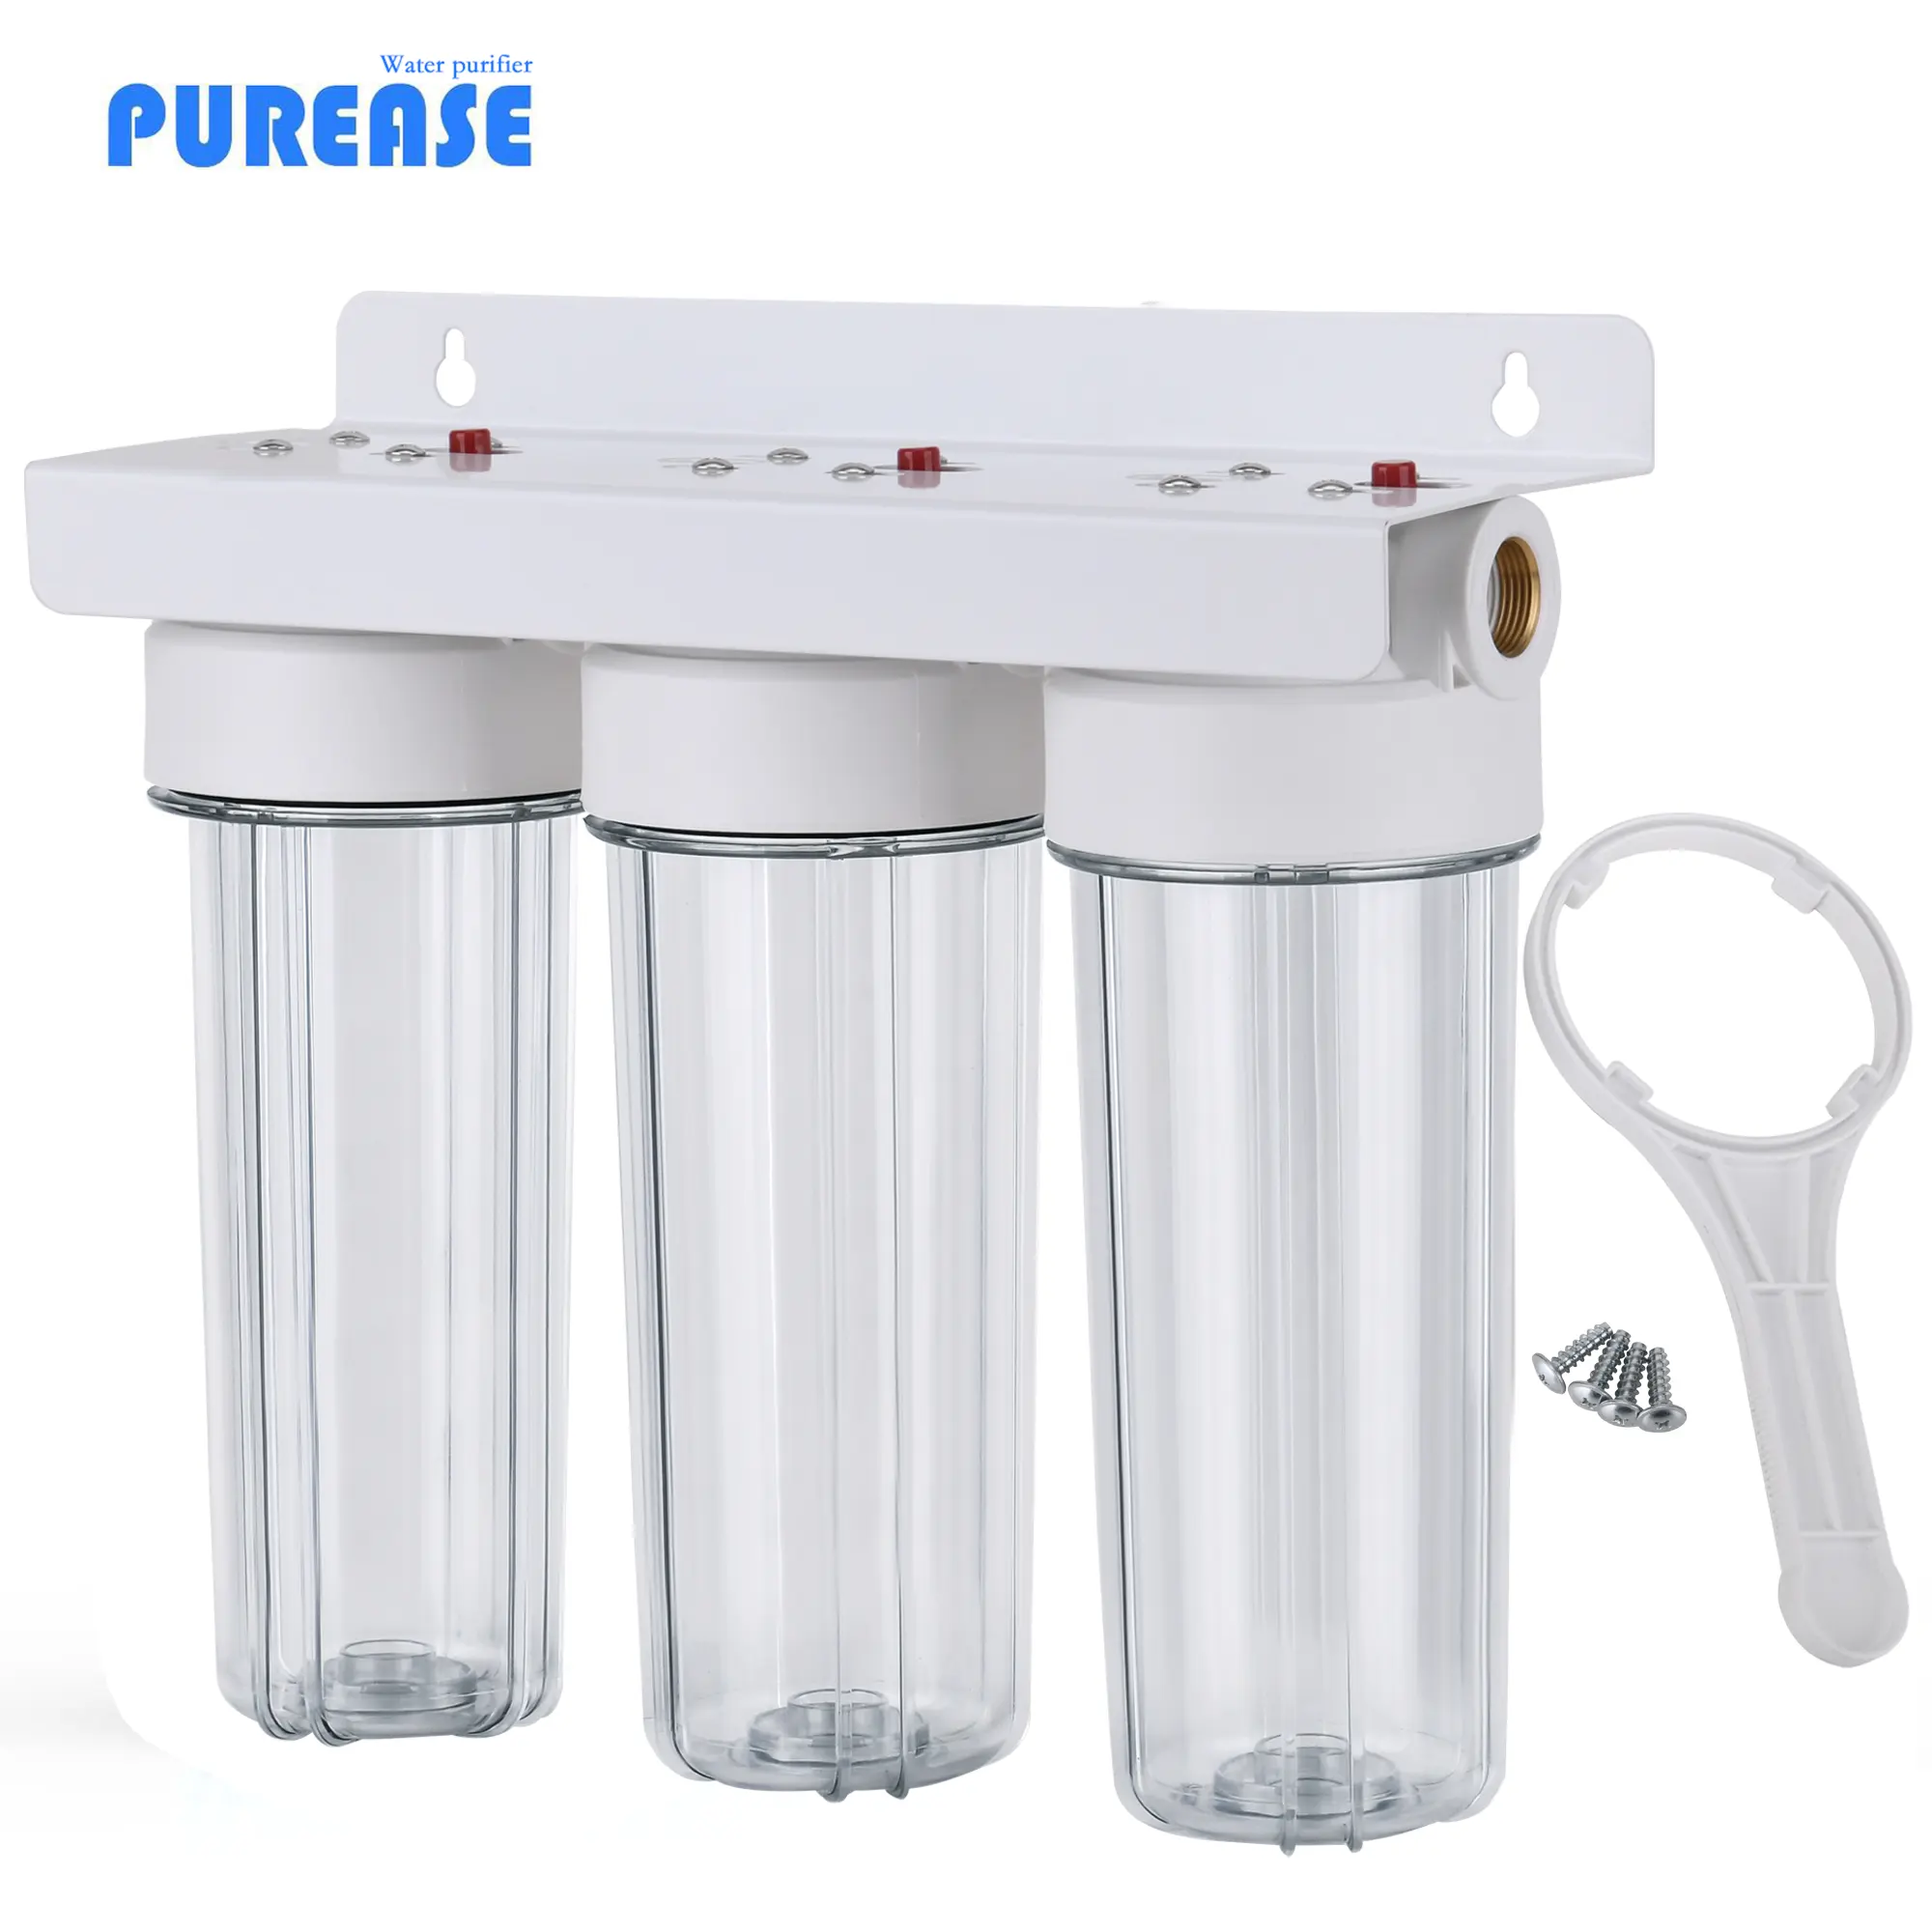 FACTORY CUSTOMIZATION 10 inch Whole House Water Filter 3-Stage RO-System with 1" 1"2 1/4" 3/4" thread